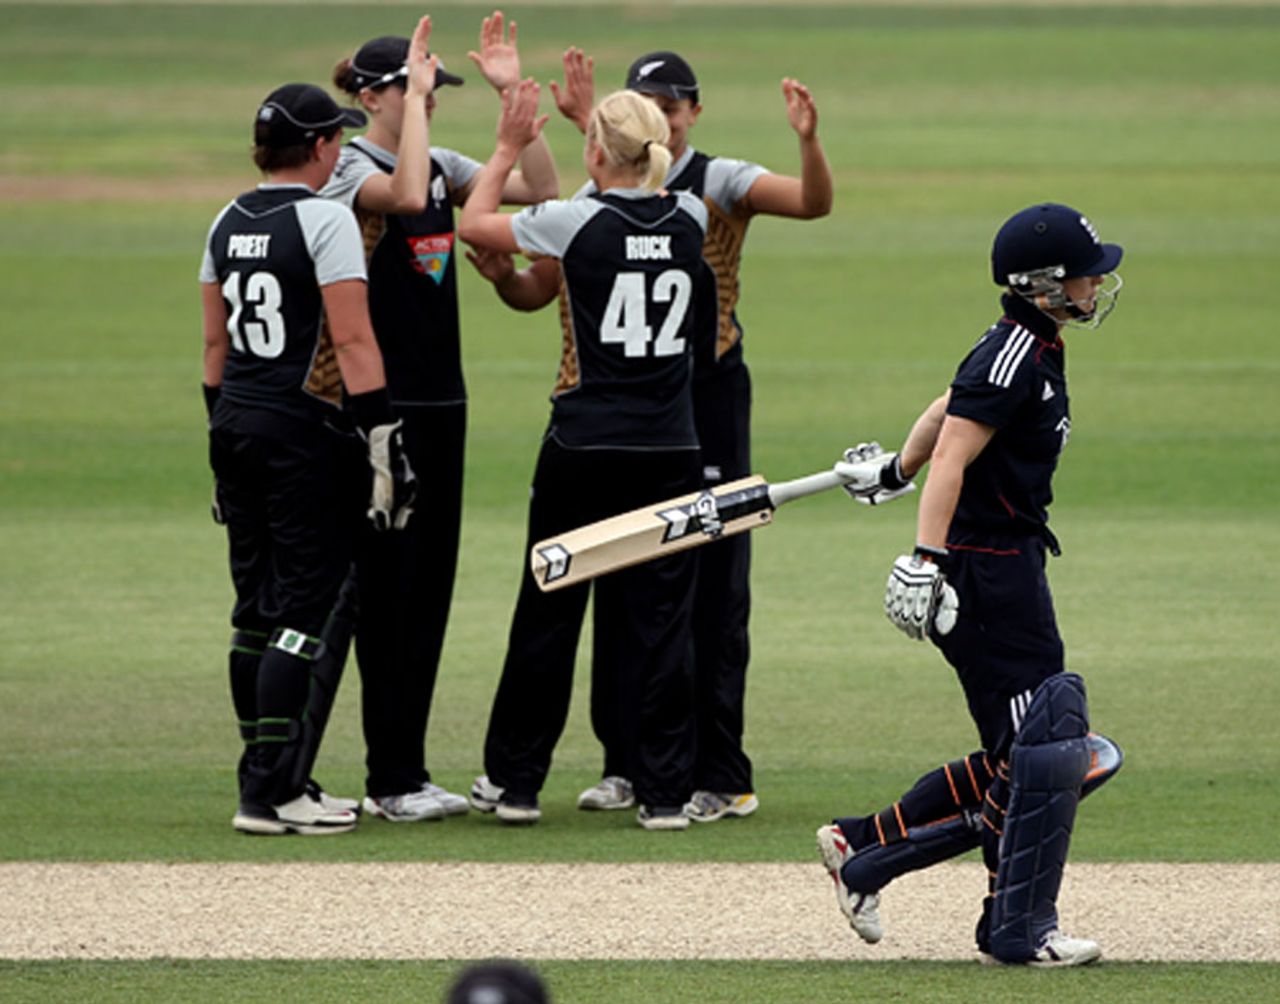 There was disappointment for Claire Taylor as she was bowled by Sian Ruck for 2, England Women v New Zealand Women, 2nd T20I, Rose Bowl, July 1, 2010